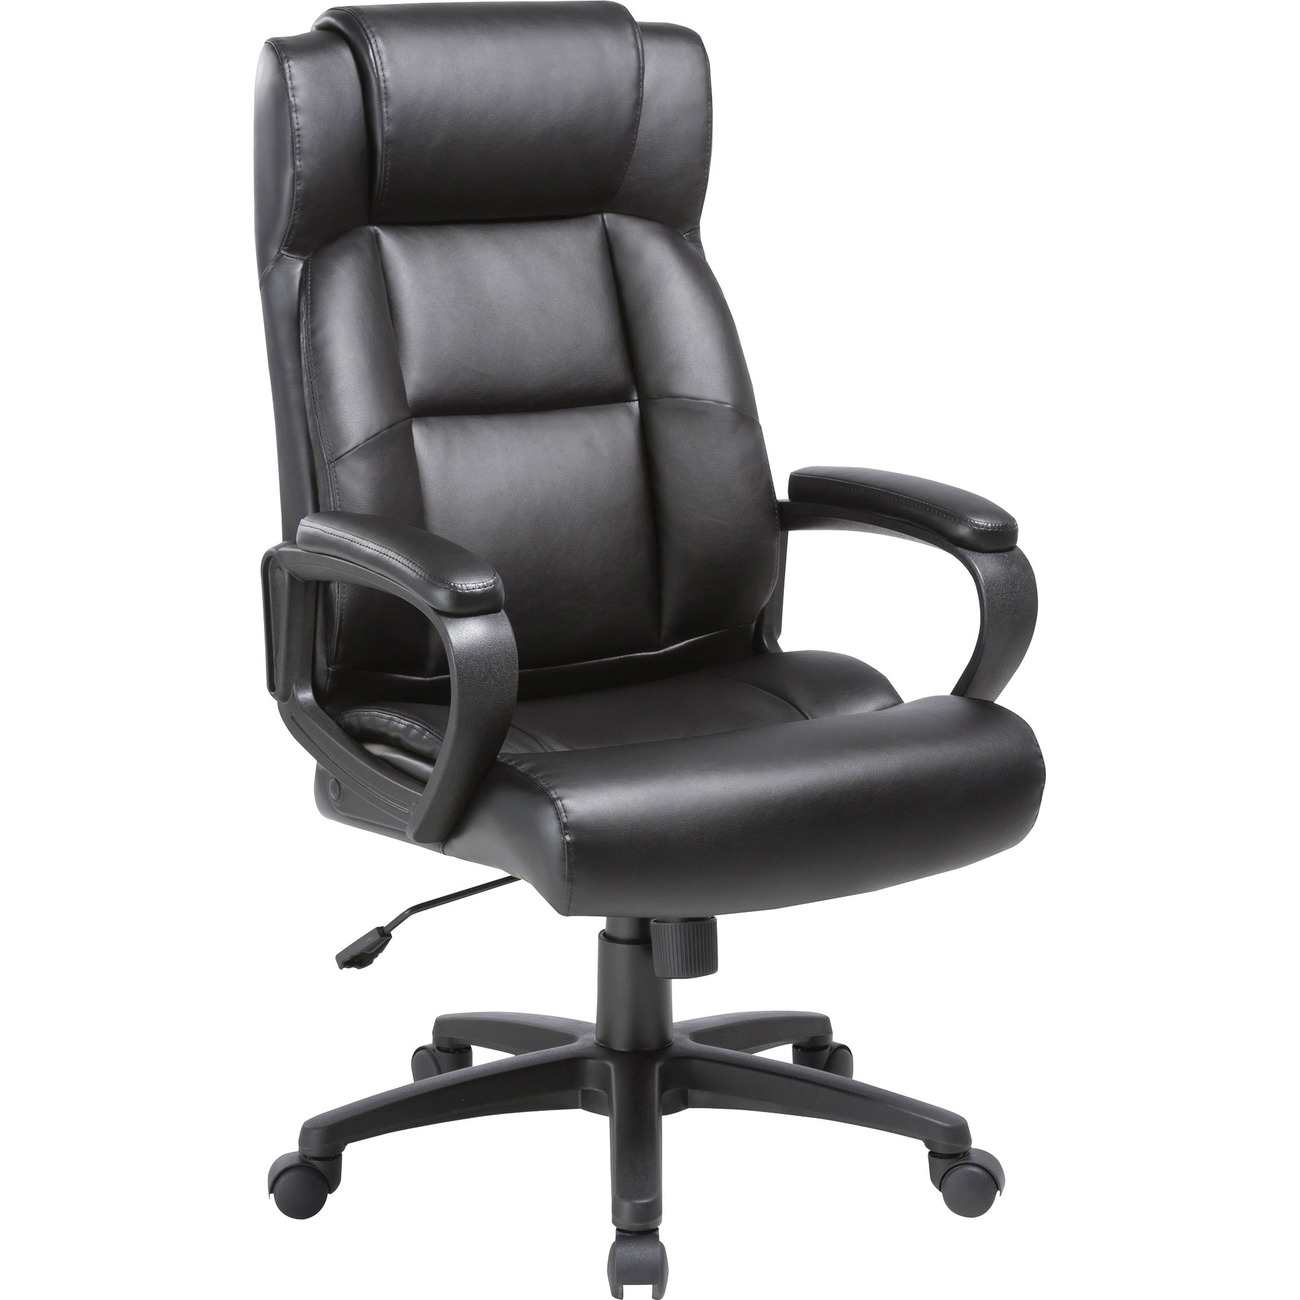 Lorell Soho High Back Leather Chair (LLR41844)-image